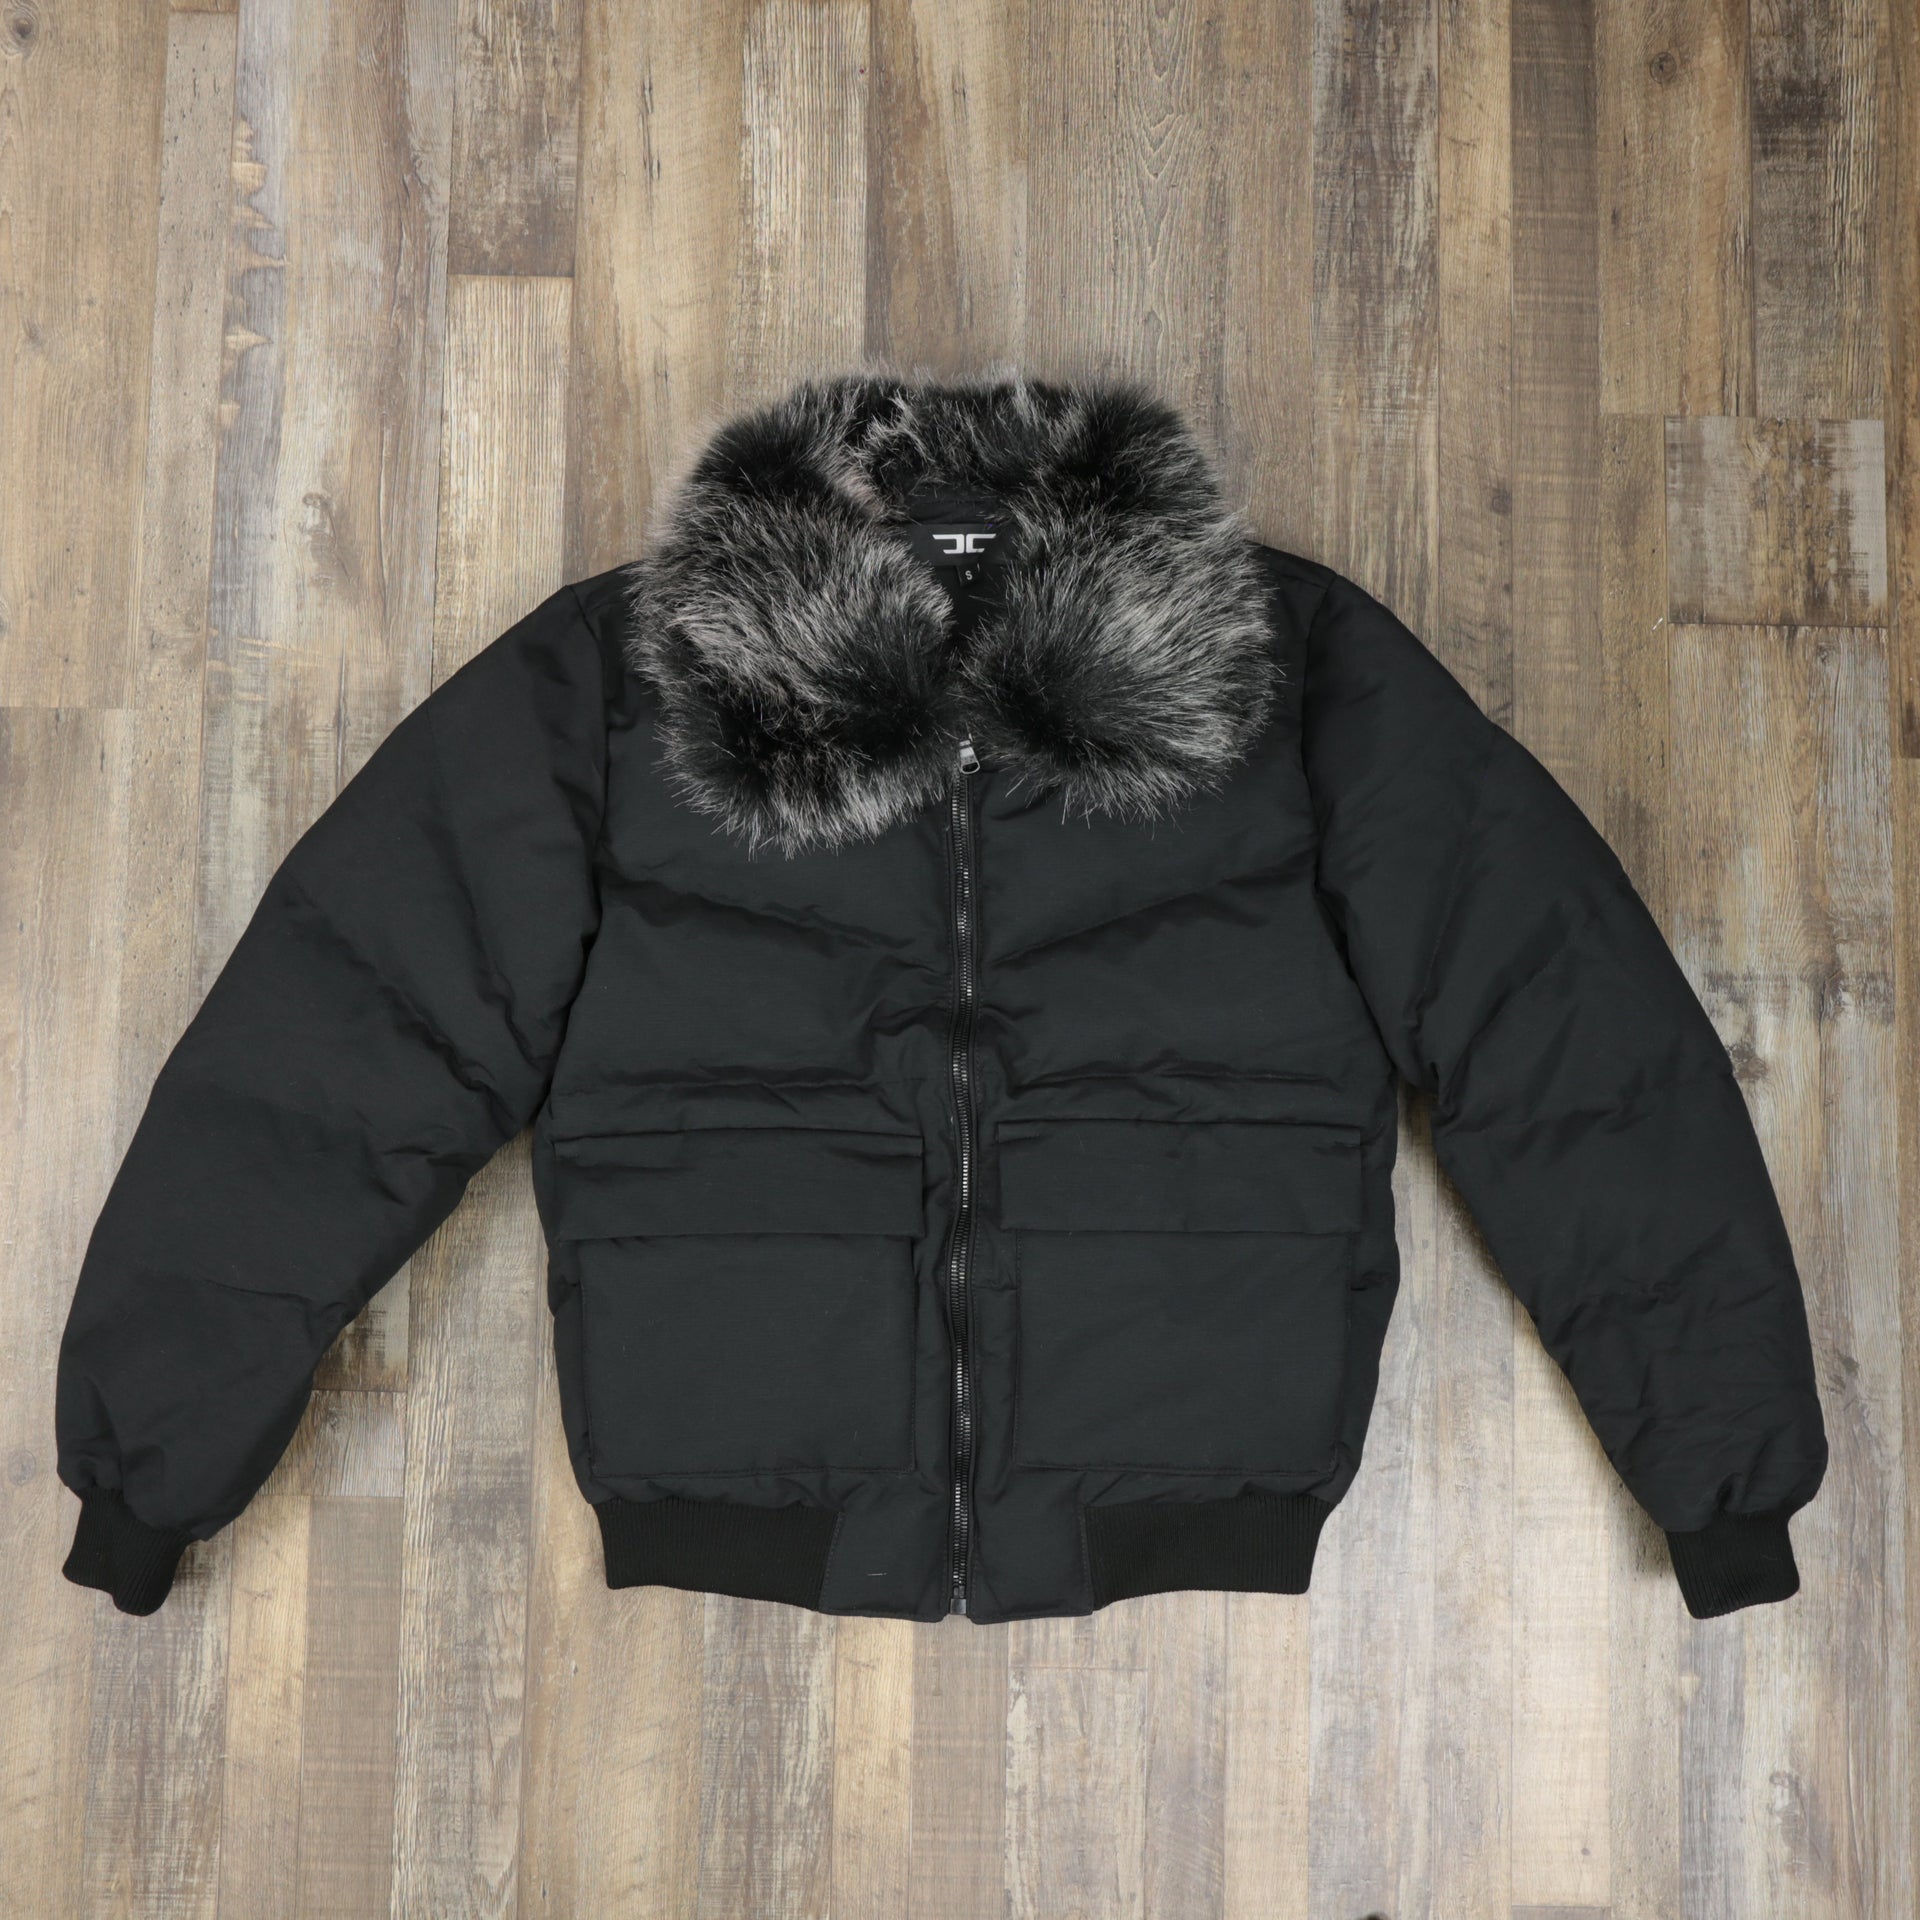 front of the jacket with no hood Men's Black Bubble Puffer Parka Jacket With Removable Faux Fur Hood (Vegan Fur)